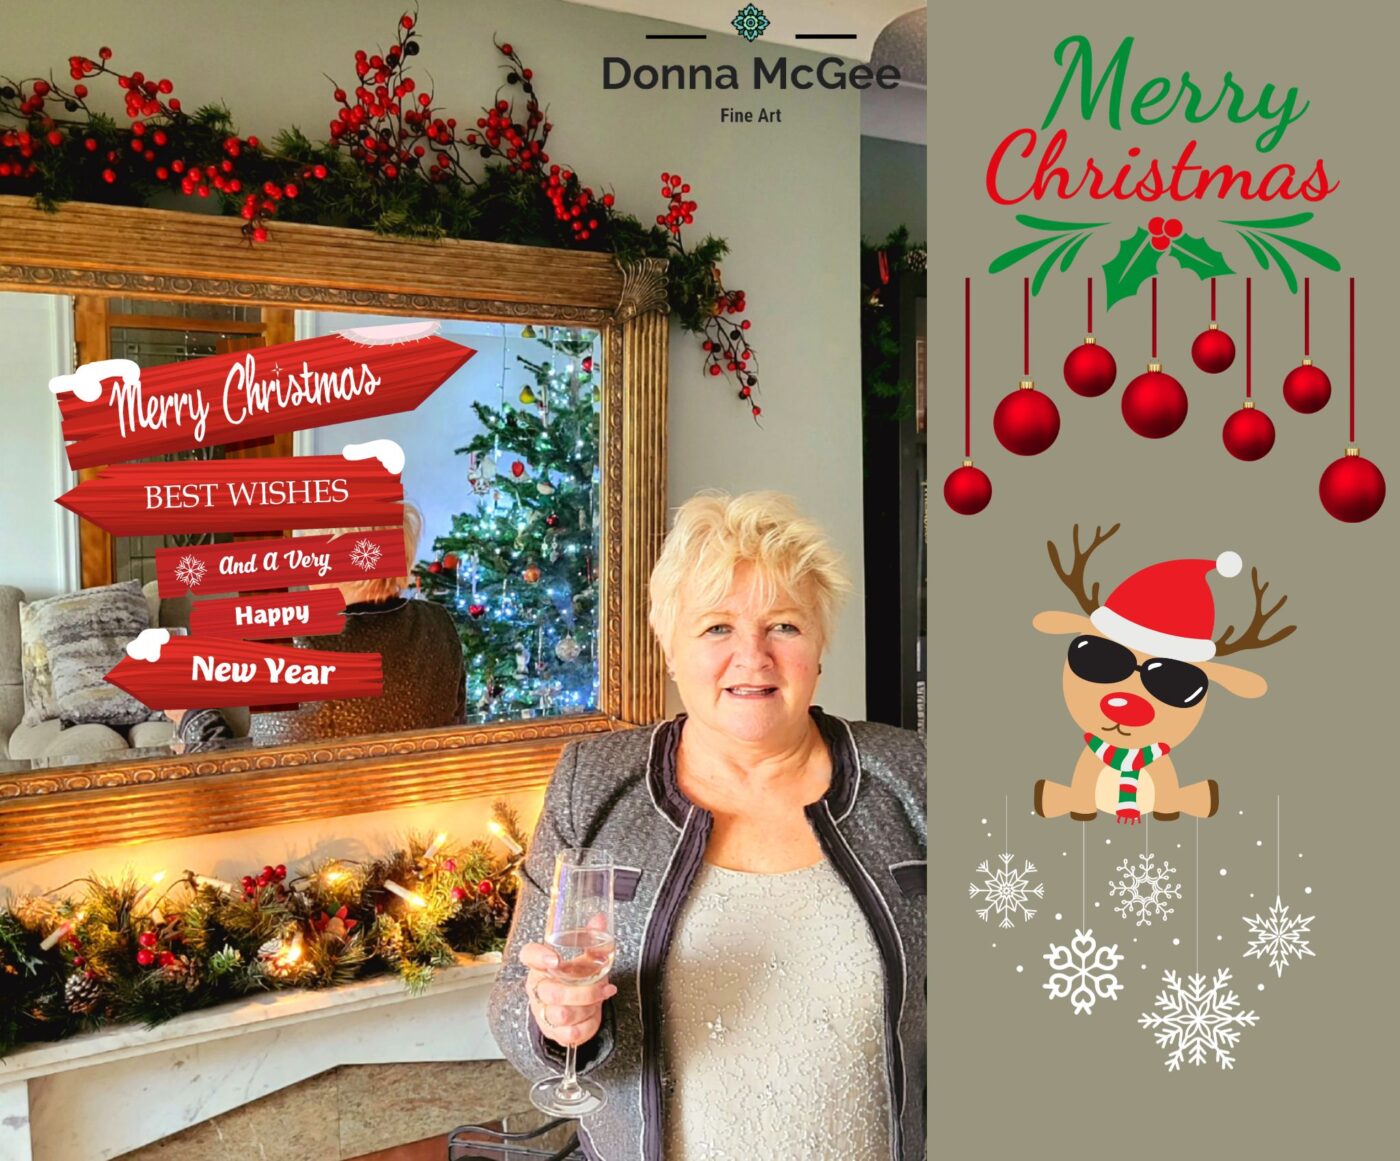 wishing everyone a very happy charistmas and good health and happiness in the new year from donna mcgee fine art